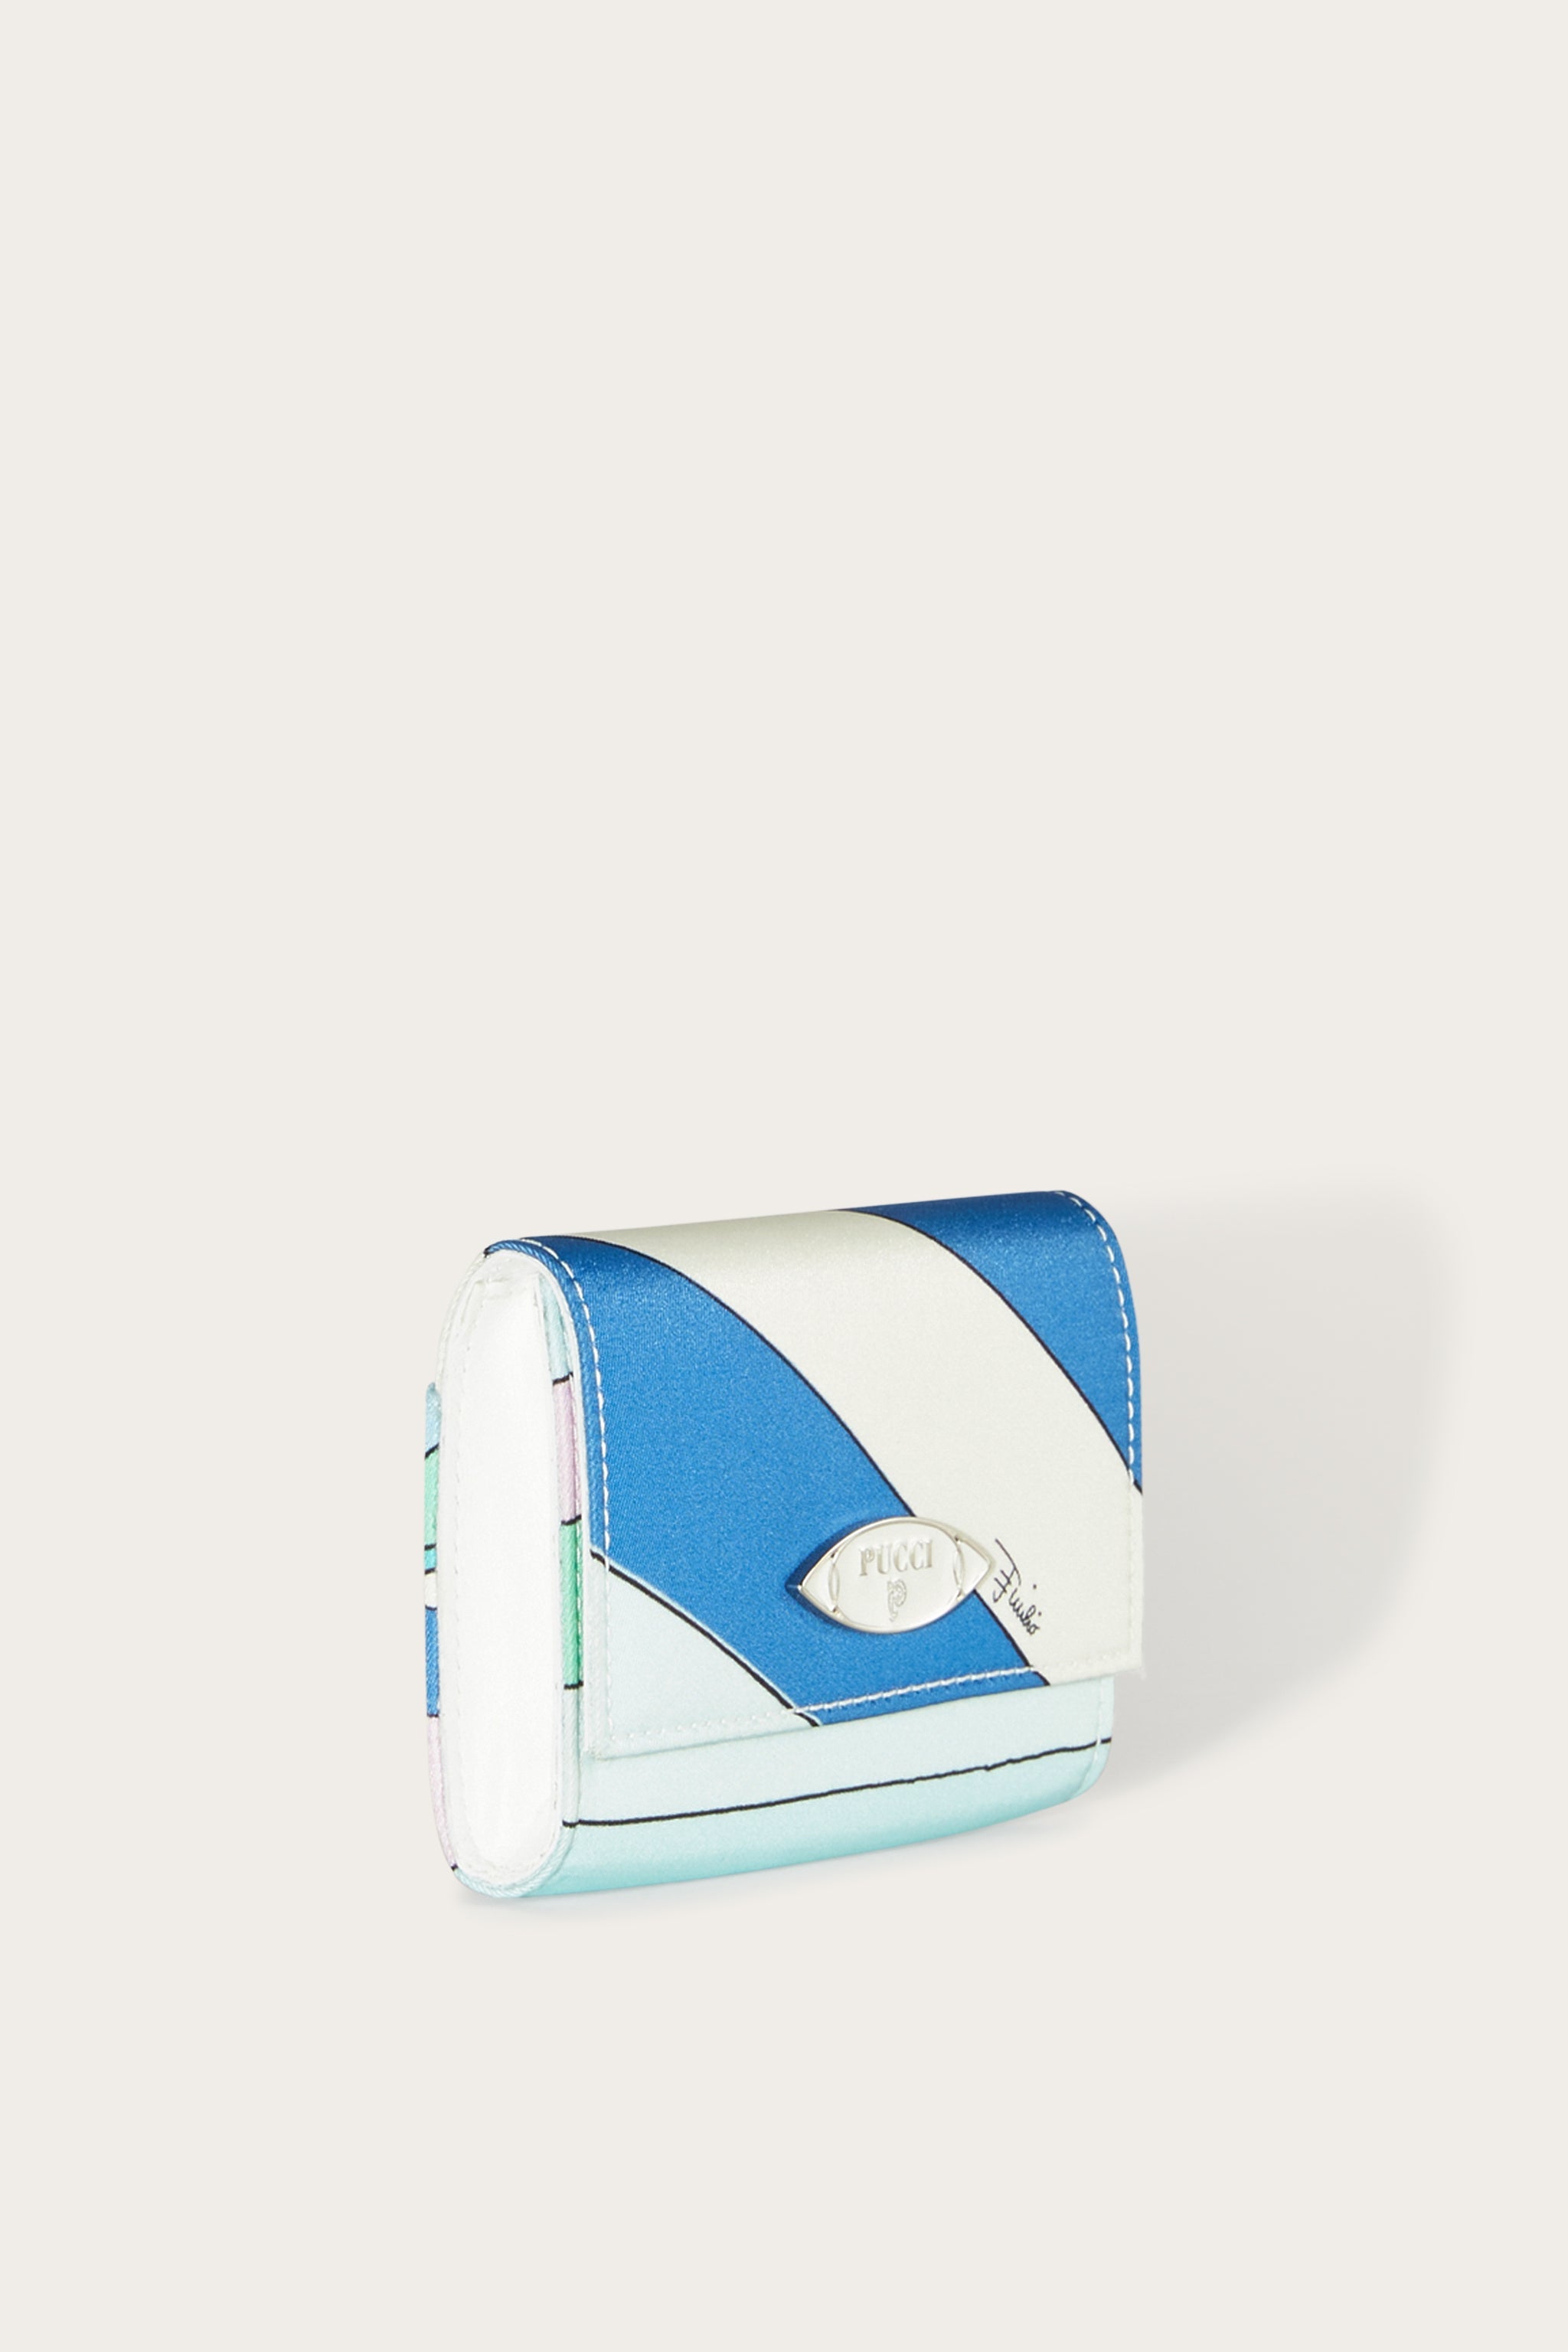 Pucci luxury small leather goods | Pucci